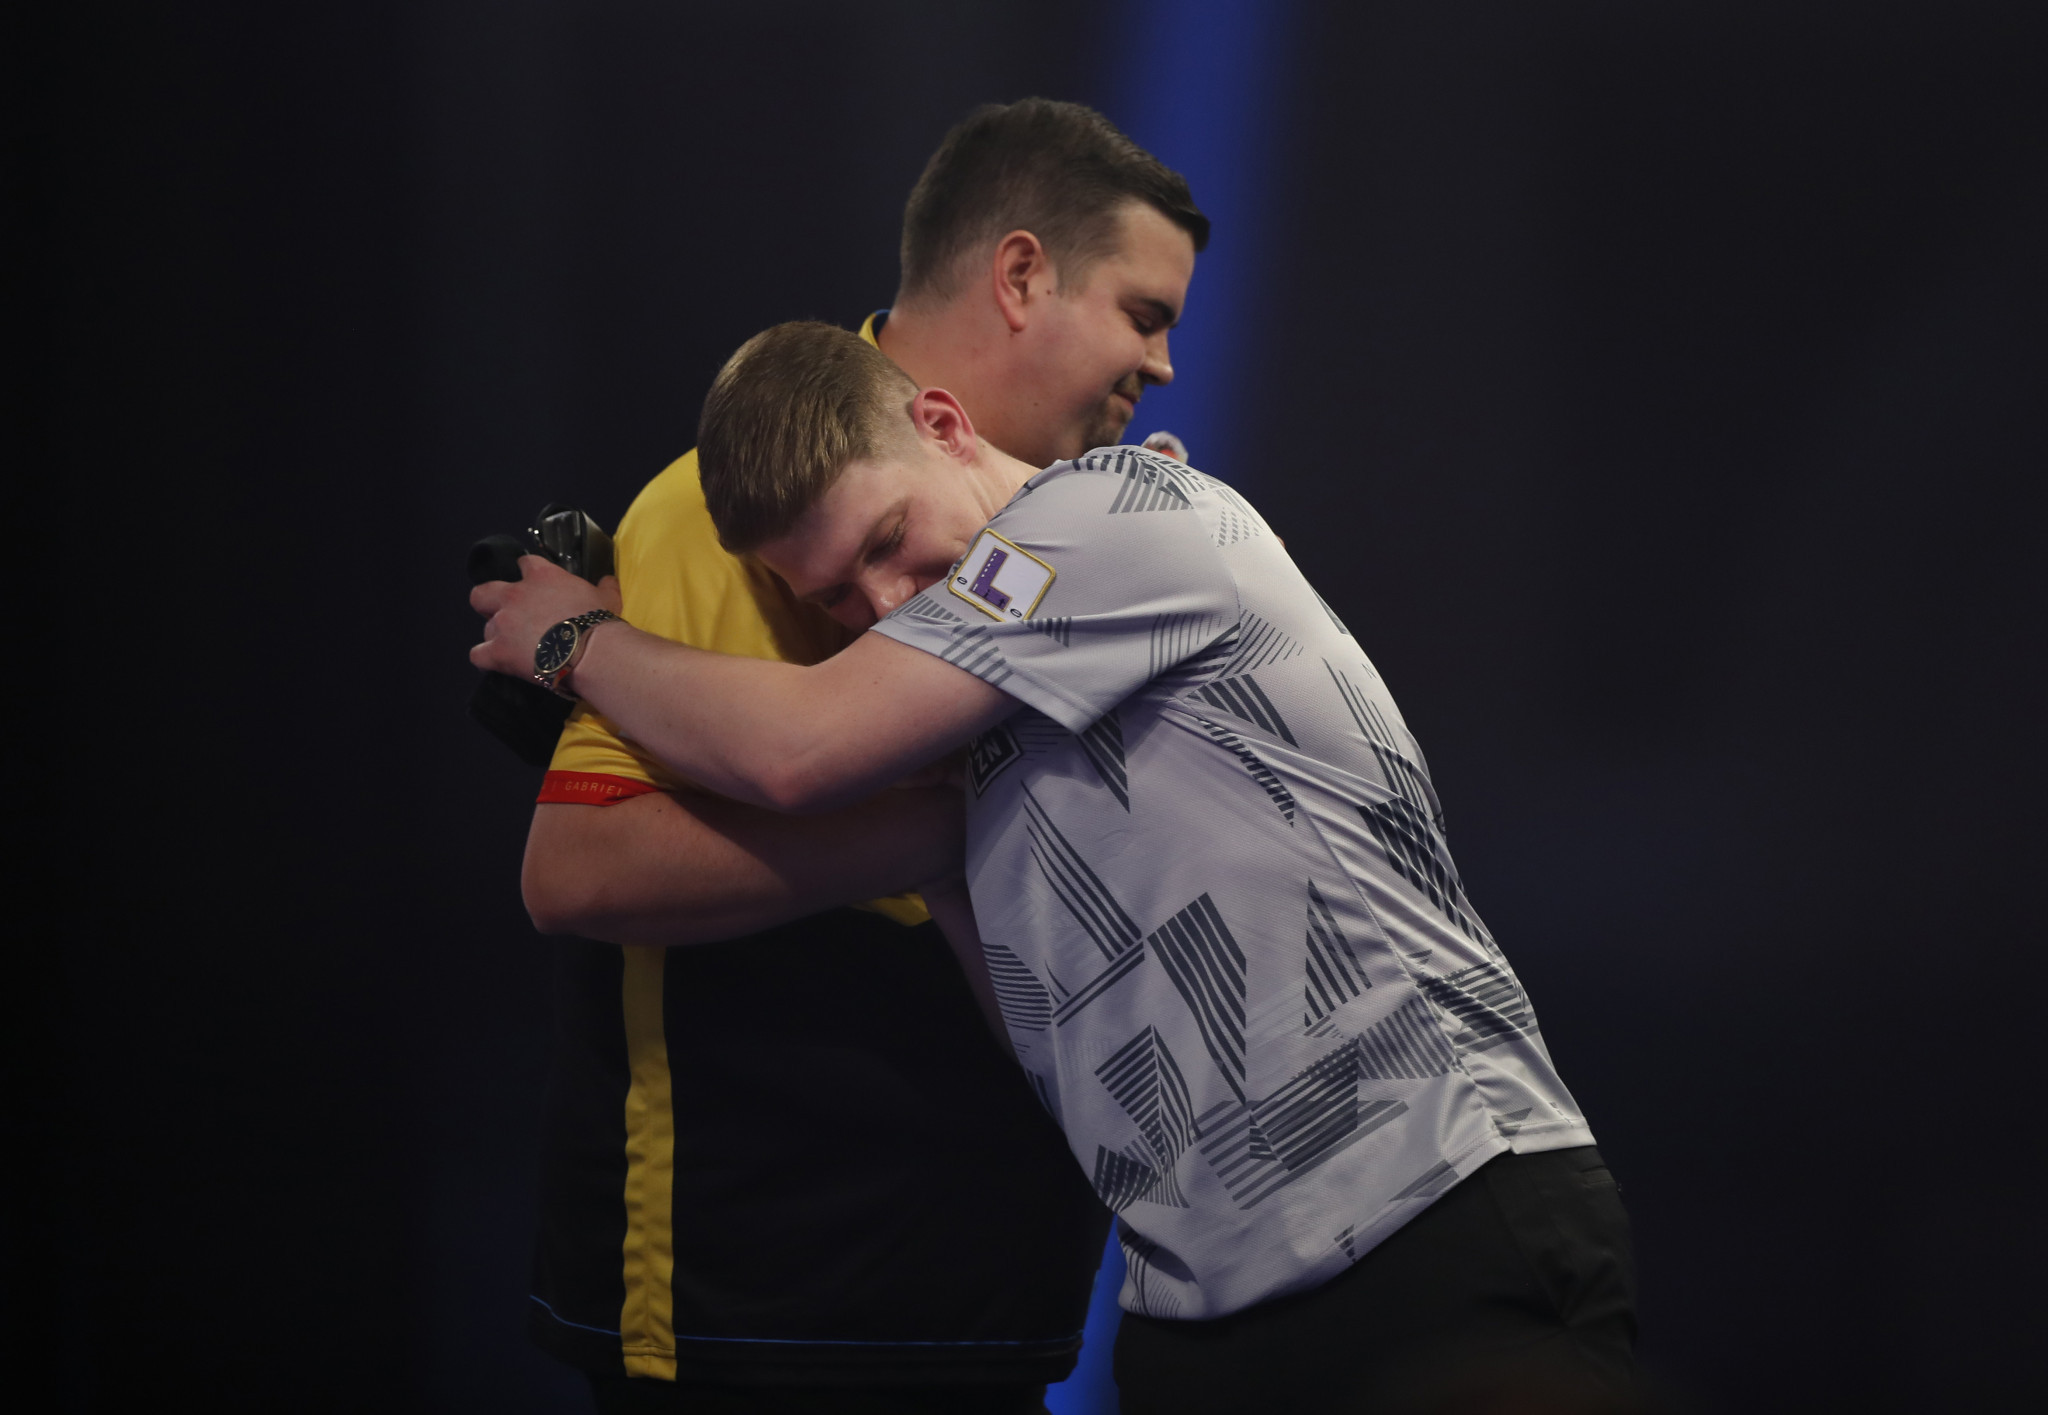 Nico Kurz (grey shirt) embraces compatriot Michael Clemens following the all German match-up at the PDC World Darts Championship ©Getty Images